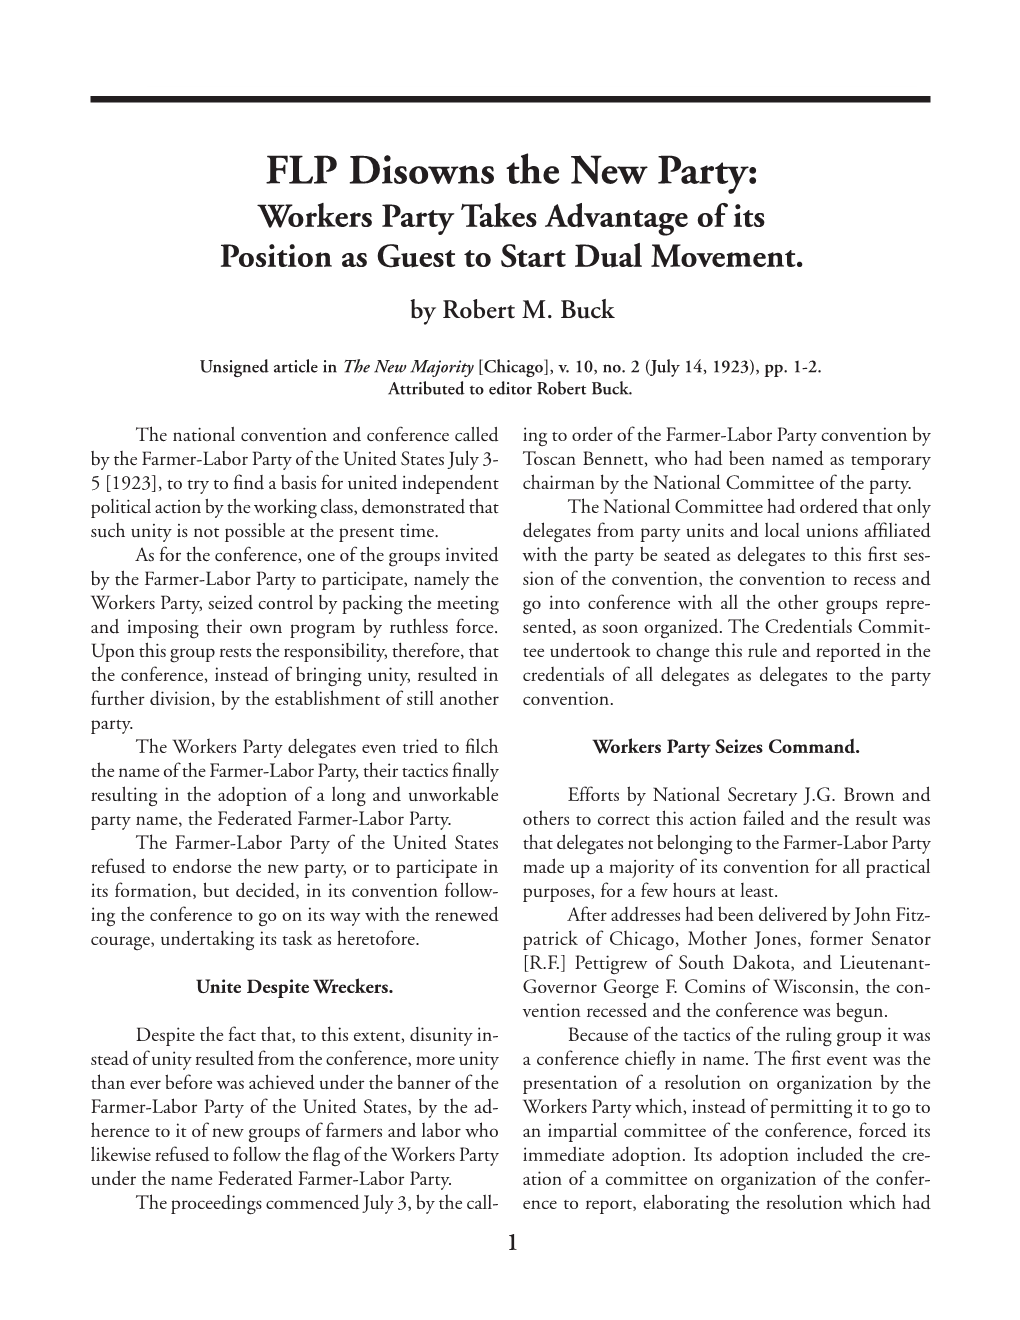 FLP Disowns the New Party: Workers Party Takes Advantage of Its Position As Guest to Start Dual Movement